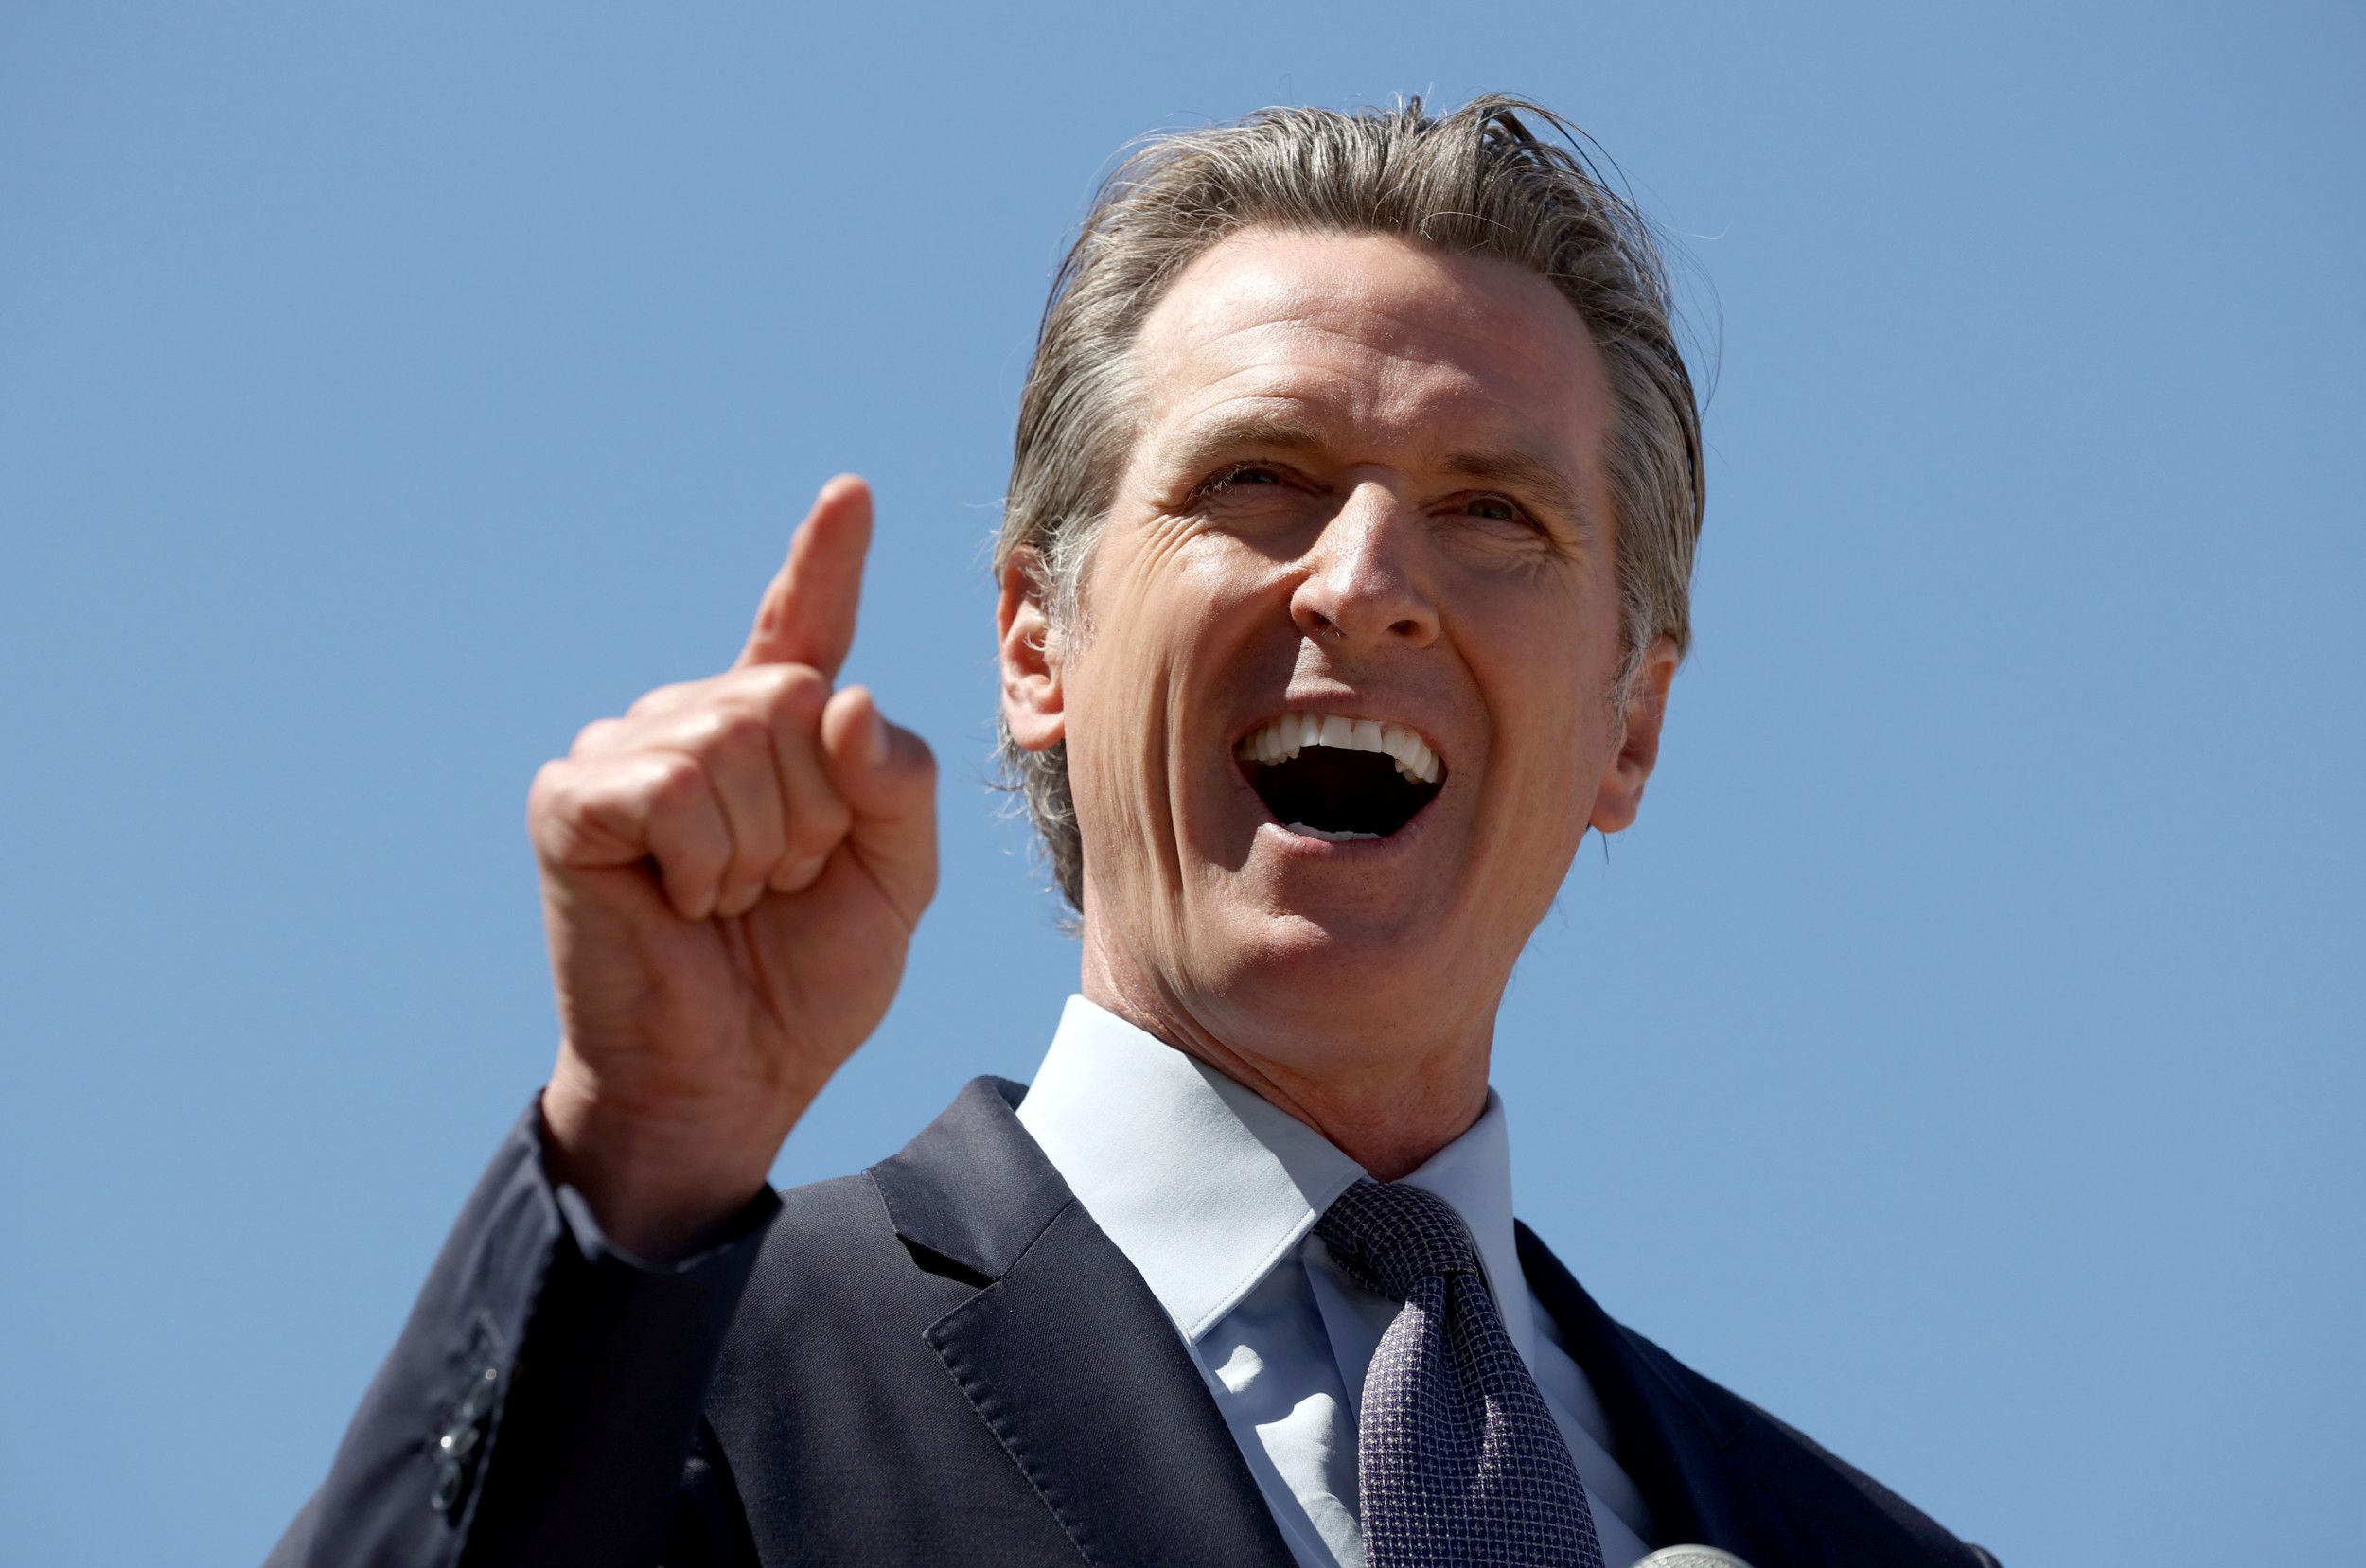 Gavin Newsom S Chances Of Losing Recall Election According To Bookmakers